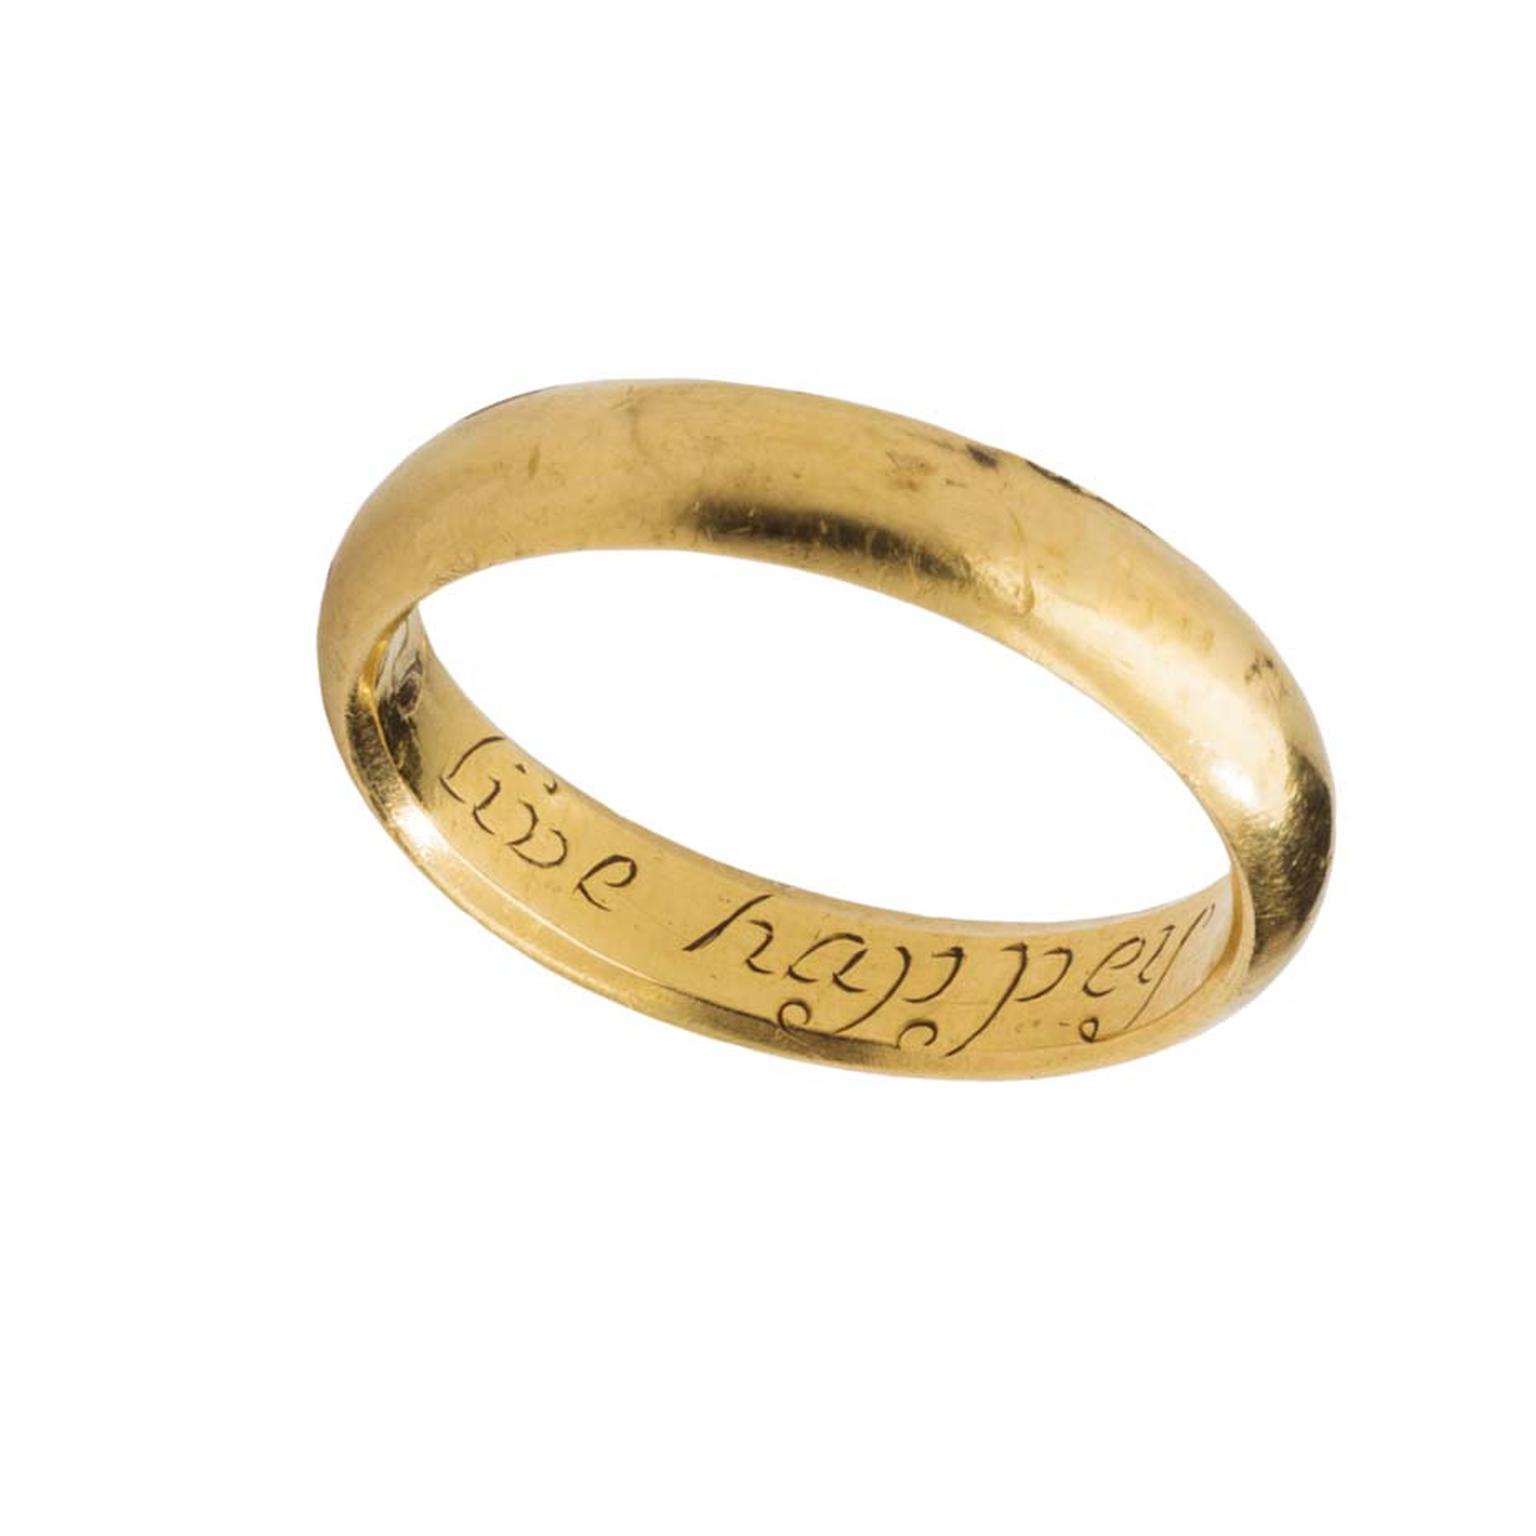 17th century gold posy ring inscribed with the words "Love and Live Happy".